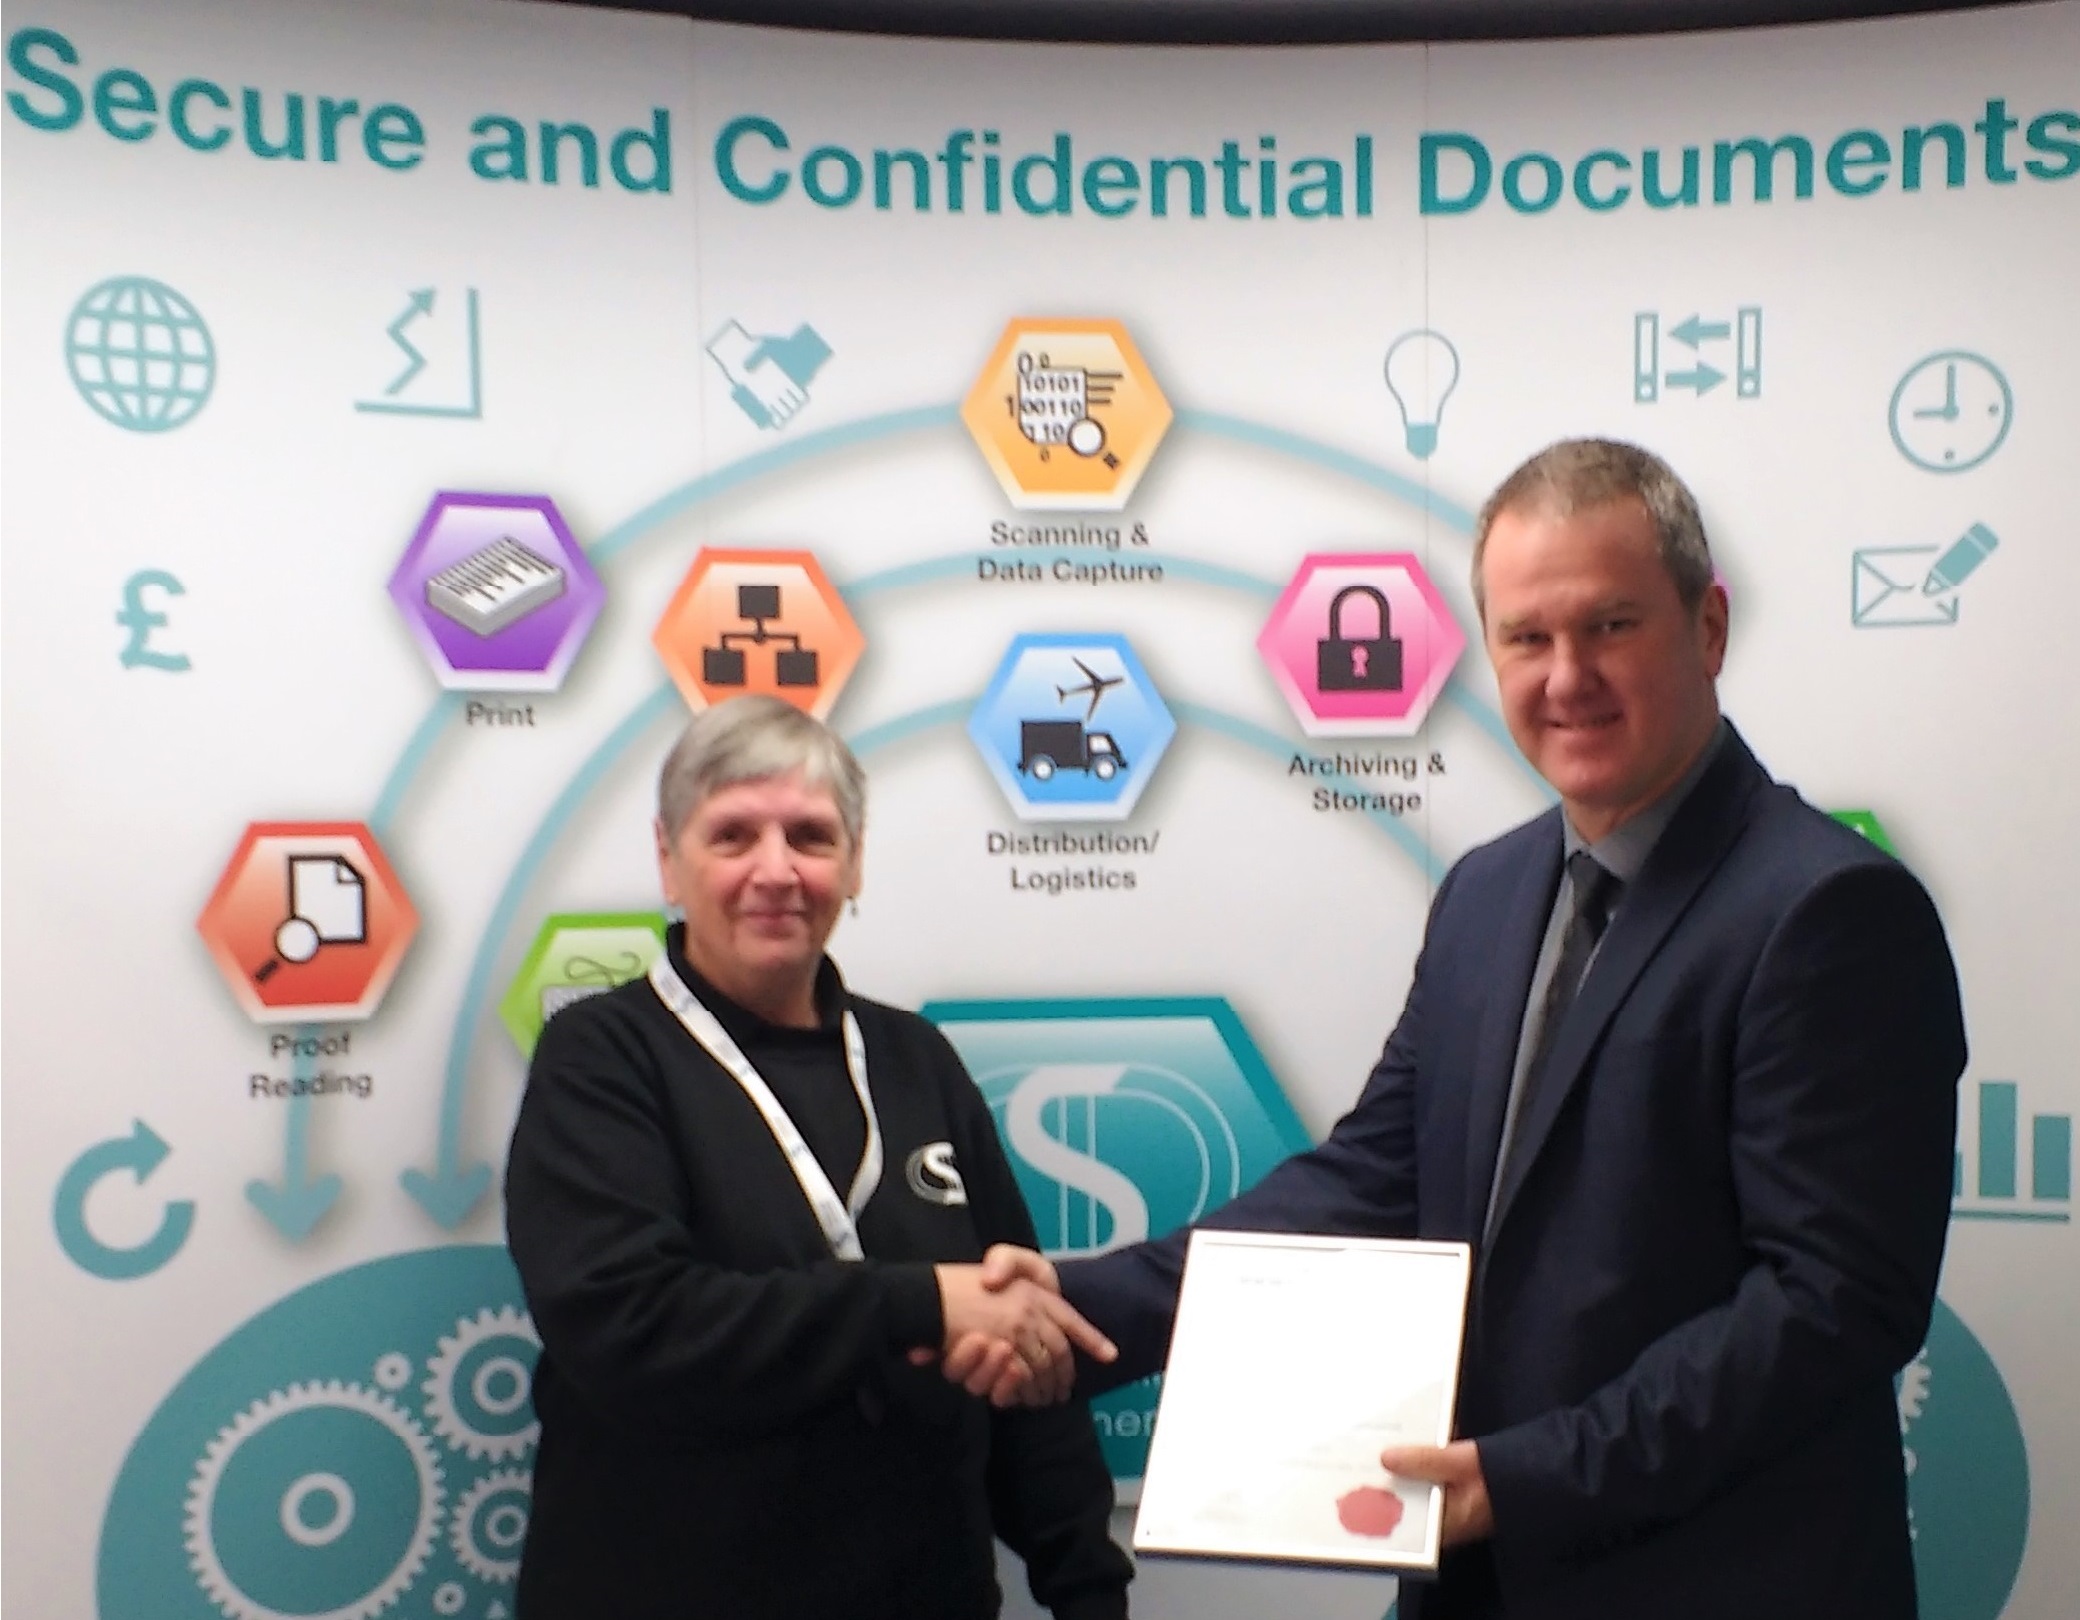 BPIF member Secure & Confidential achieves BPIF Health & Safety Seal of Excellence